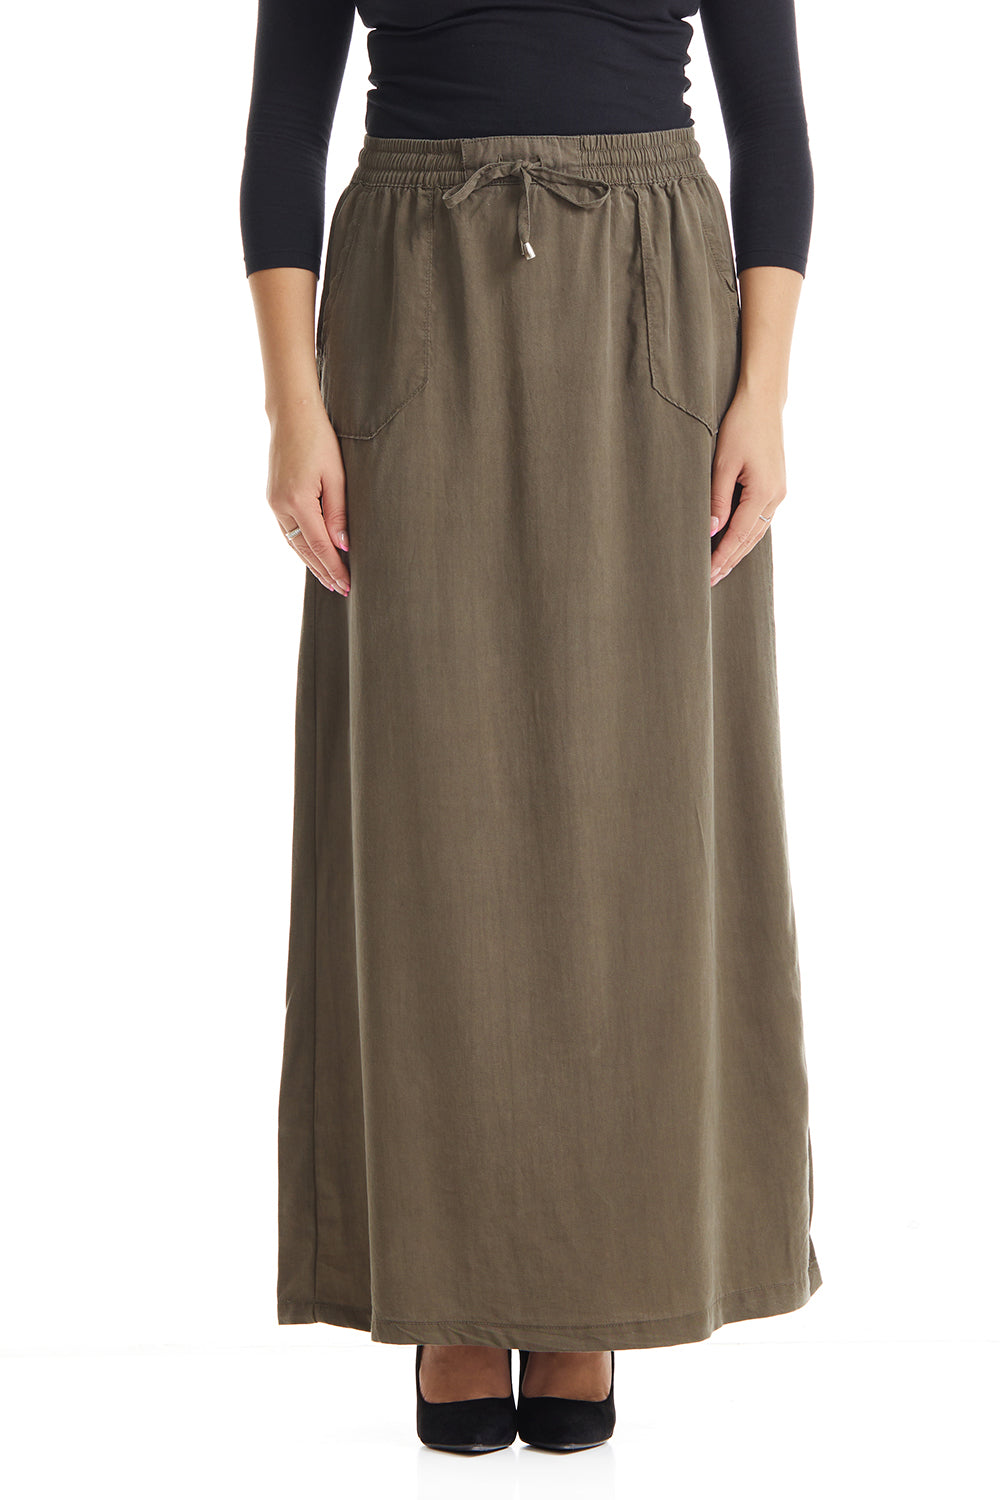 long maxi skirt with pockets and elastic waistband